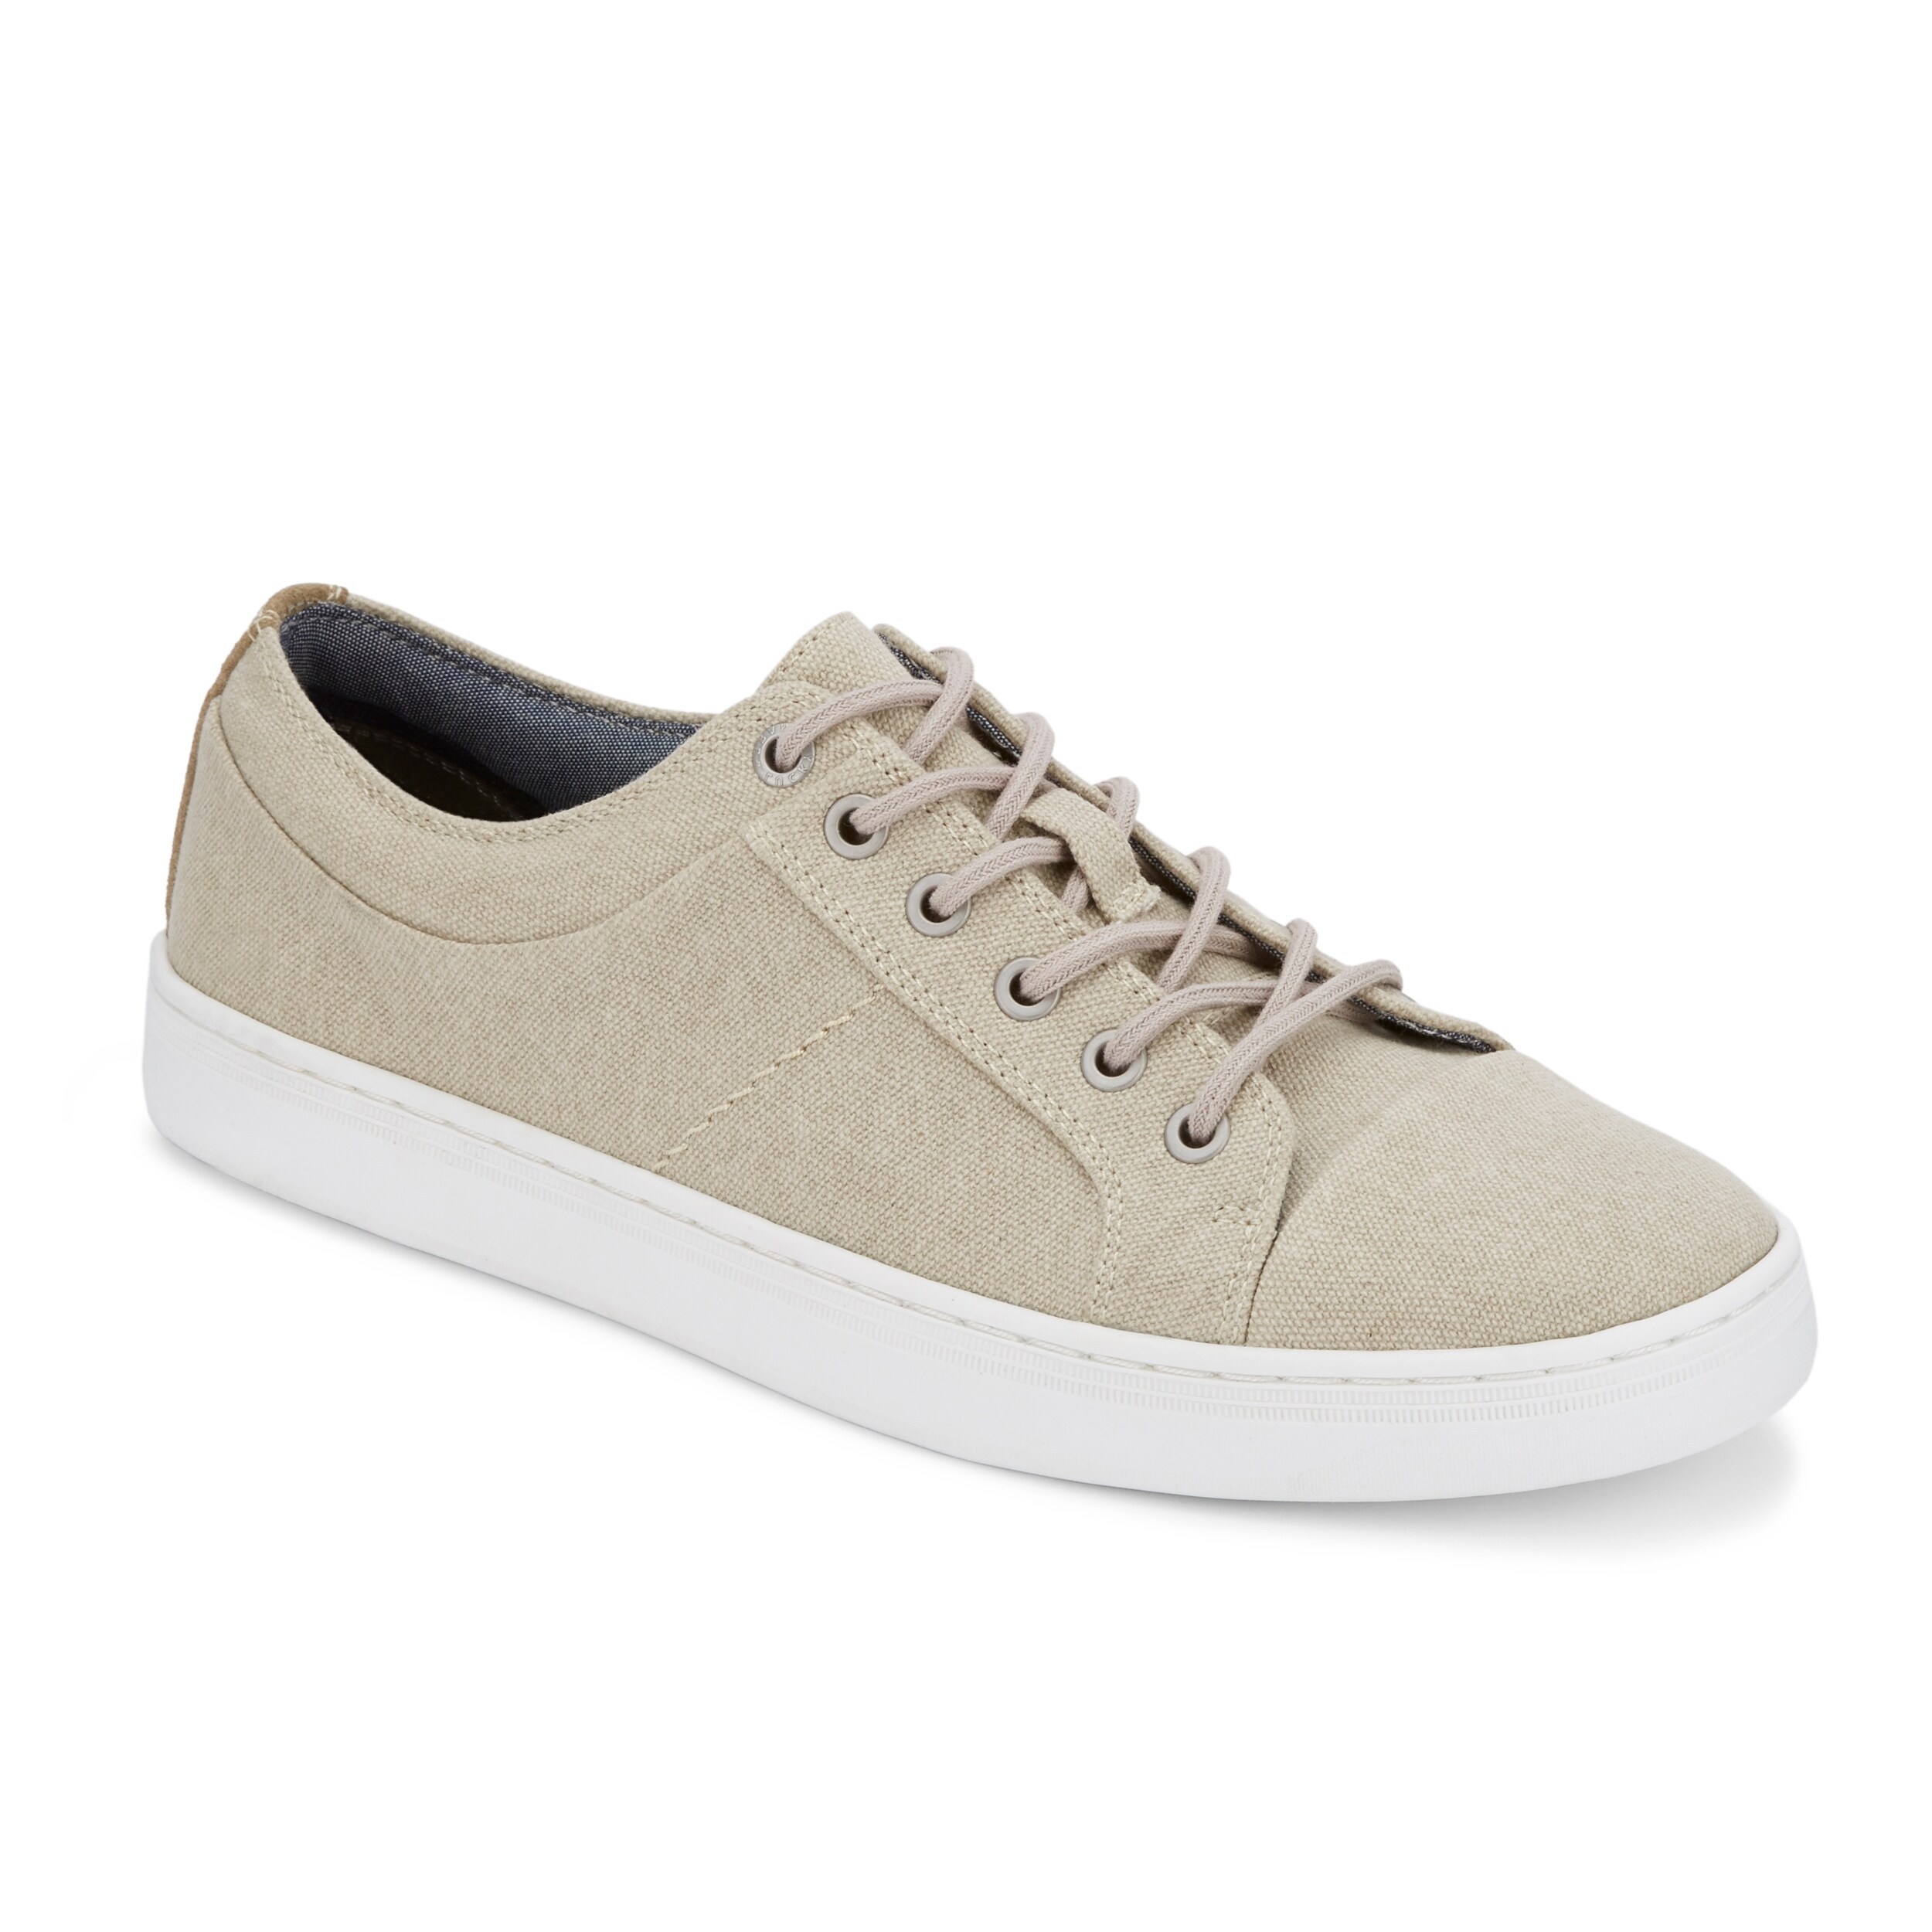 lucky brand men's shoes